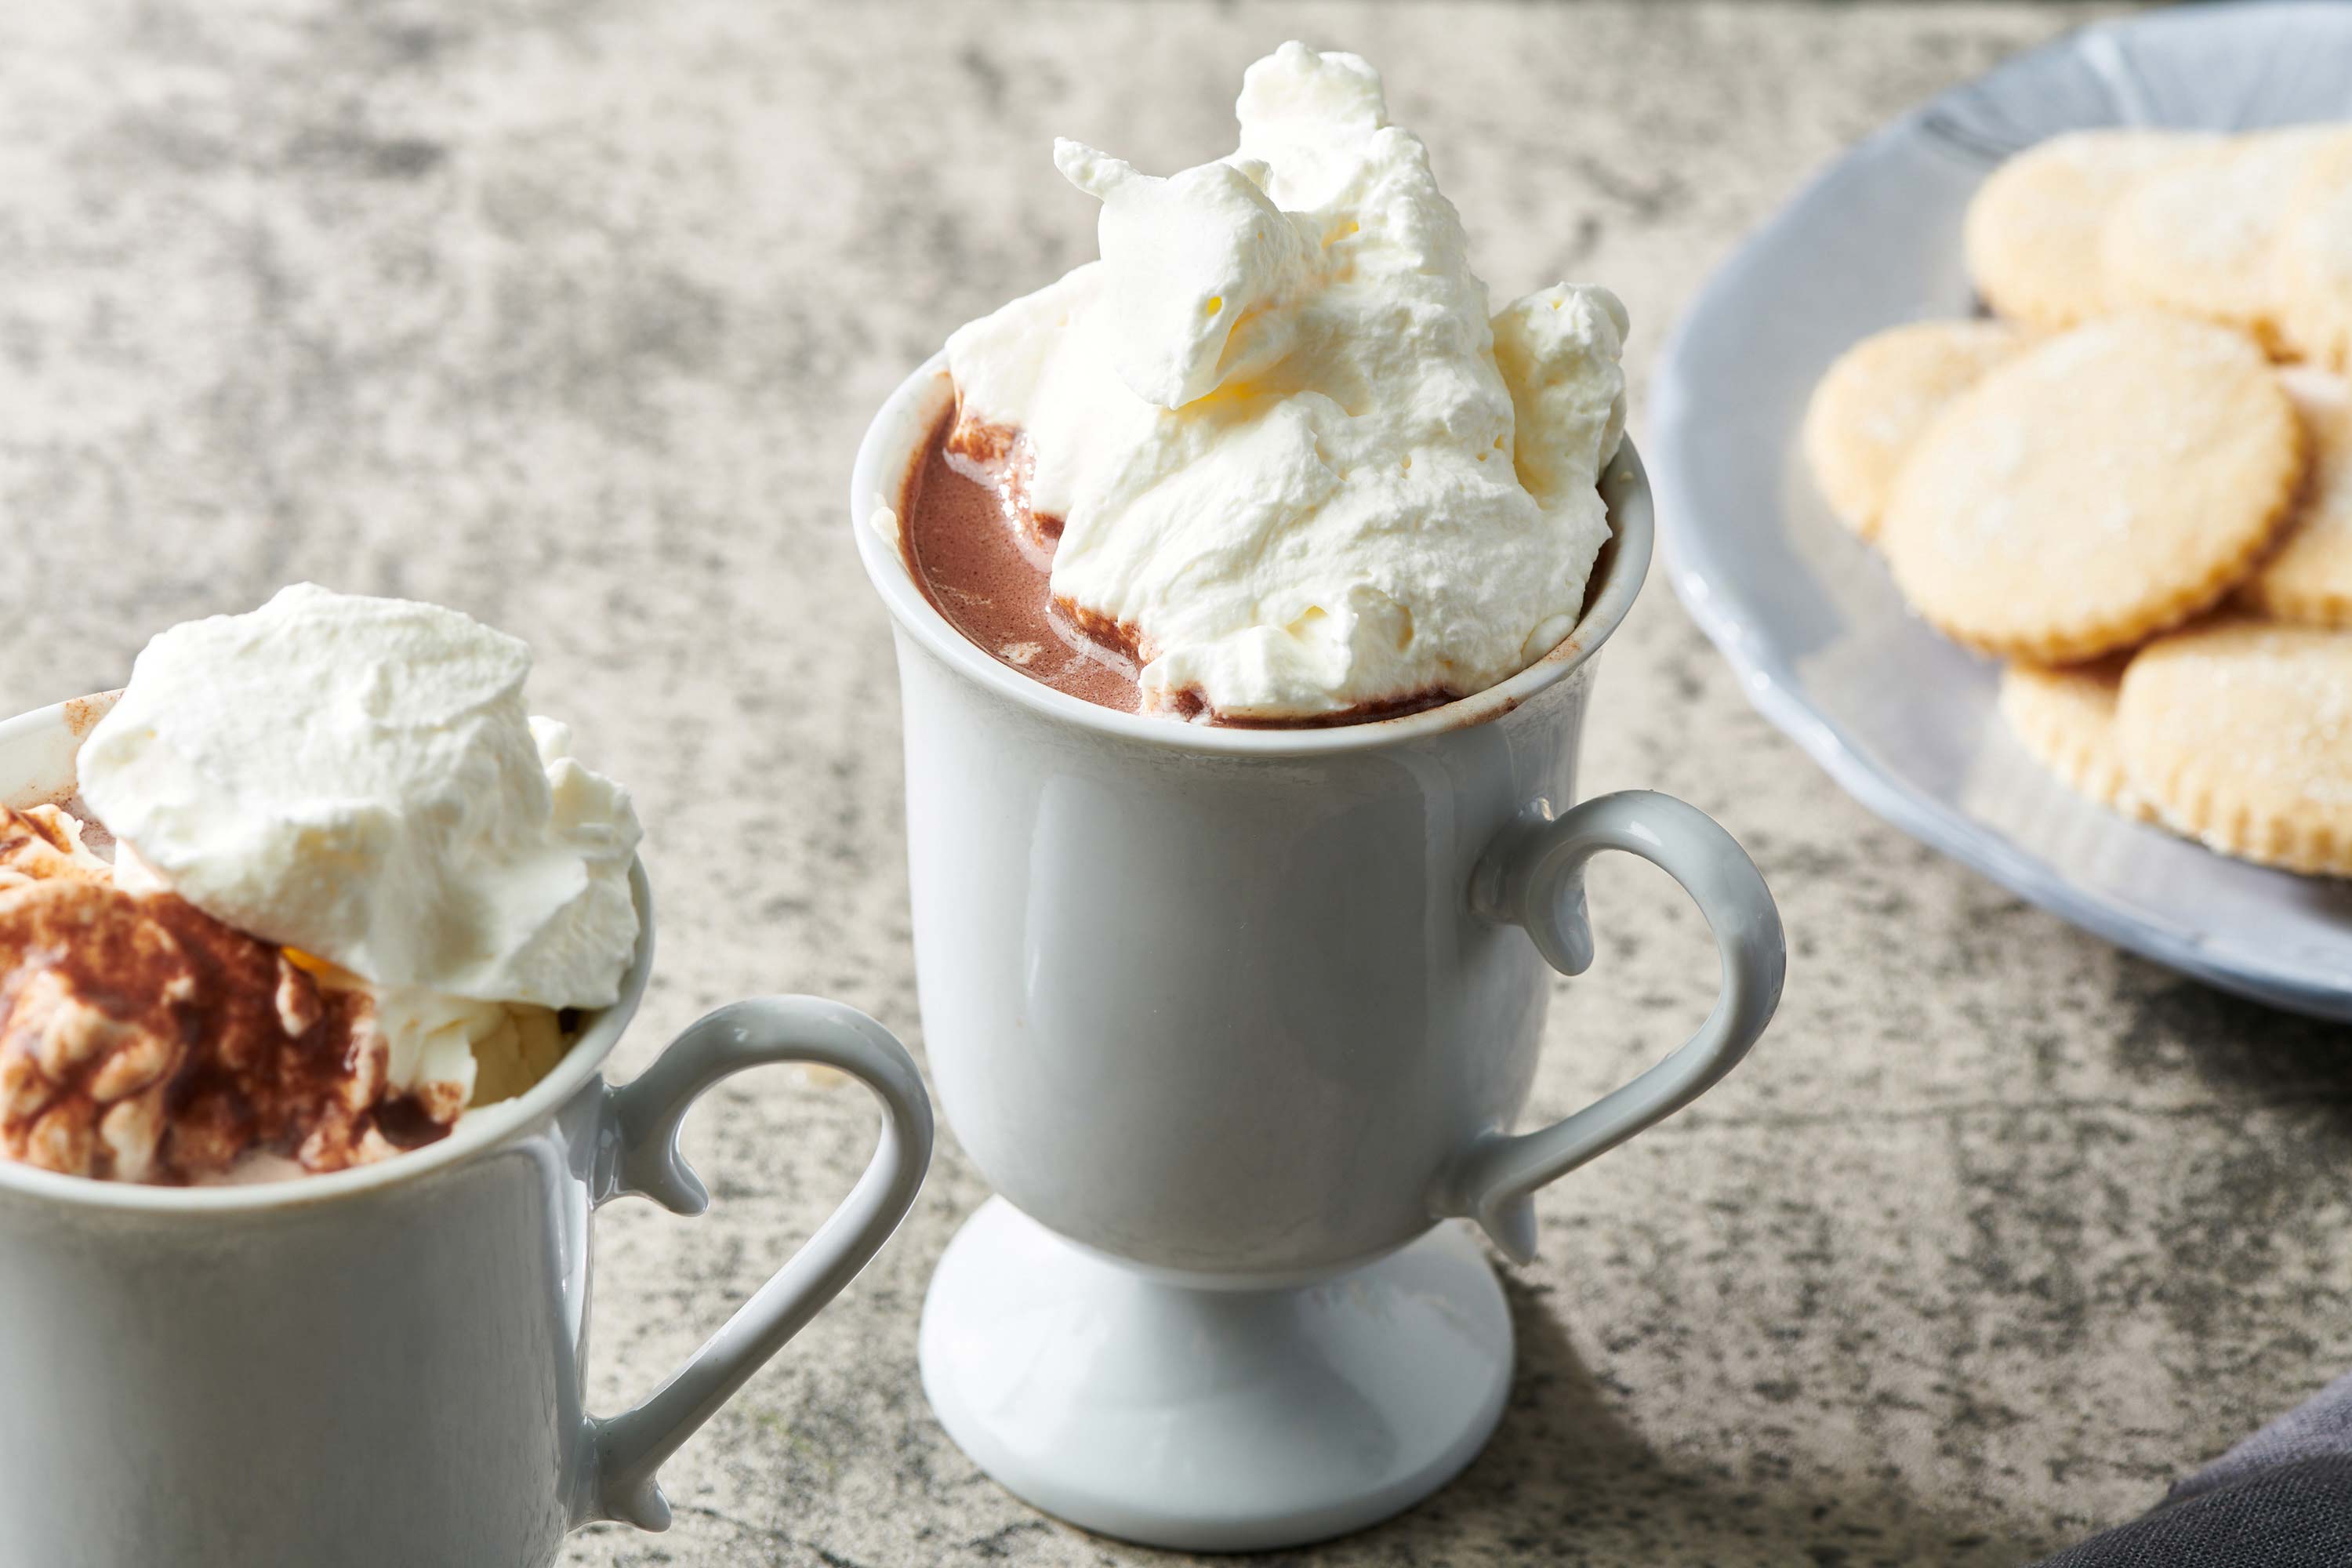 Small mug of Hot Chocolate topped with whipped cream.